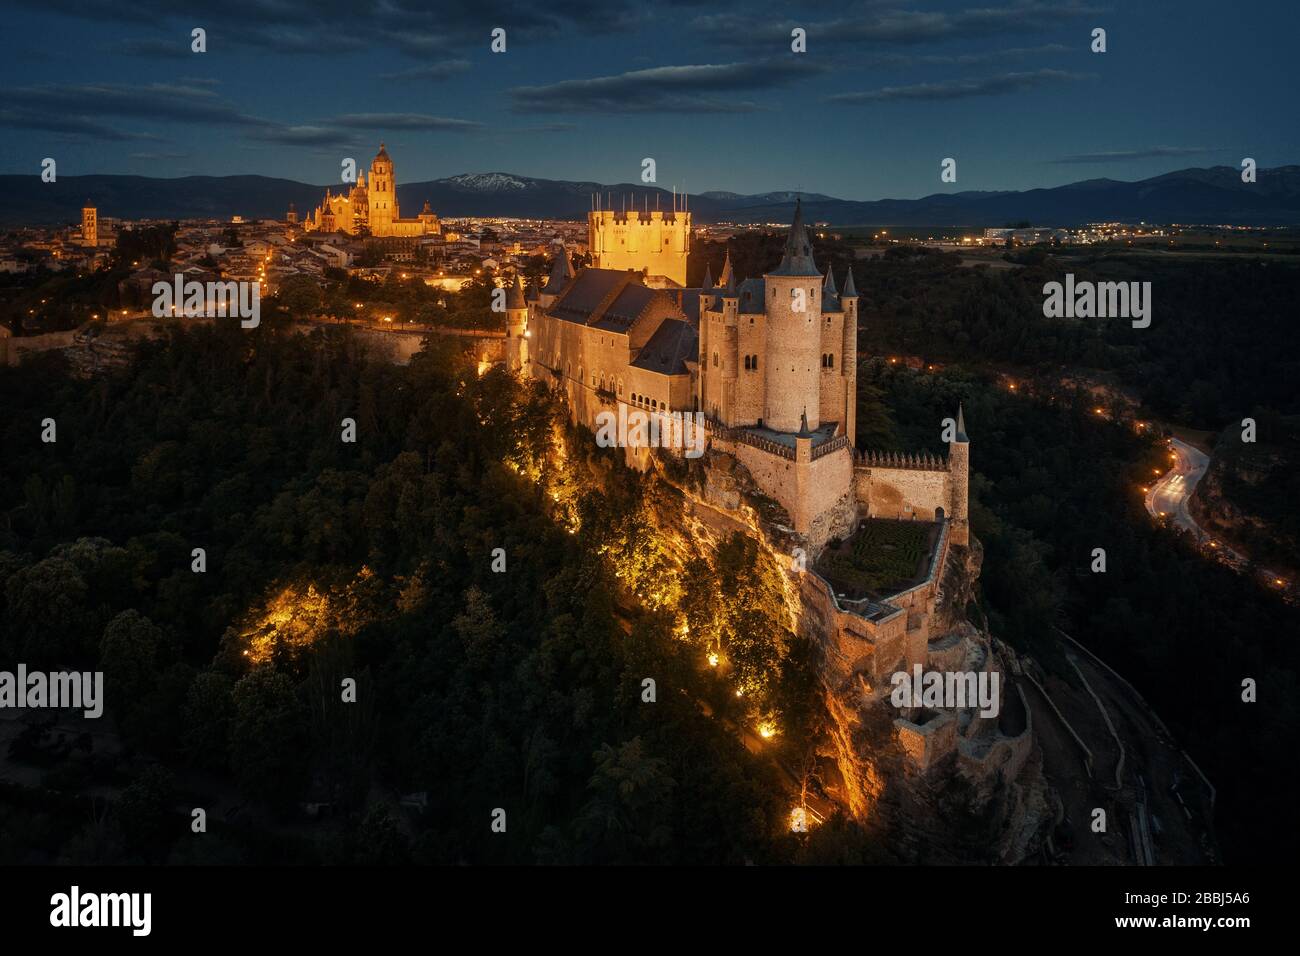 Alcazar of Segovia as the famous landmark aerial view at night in Spain ...